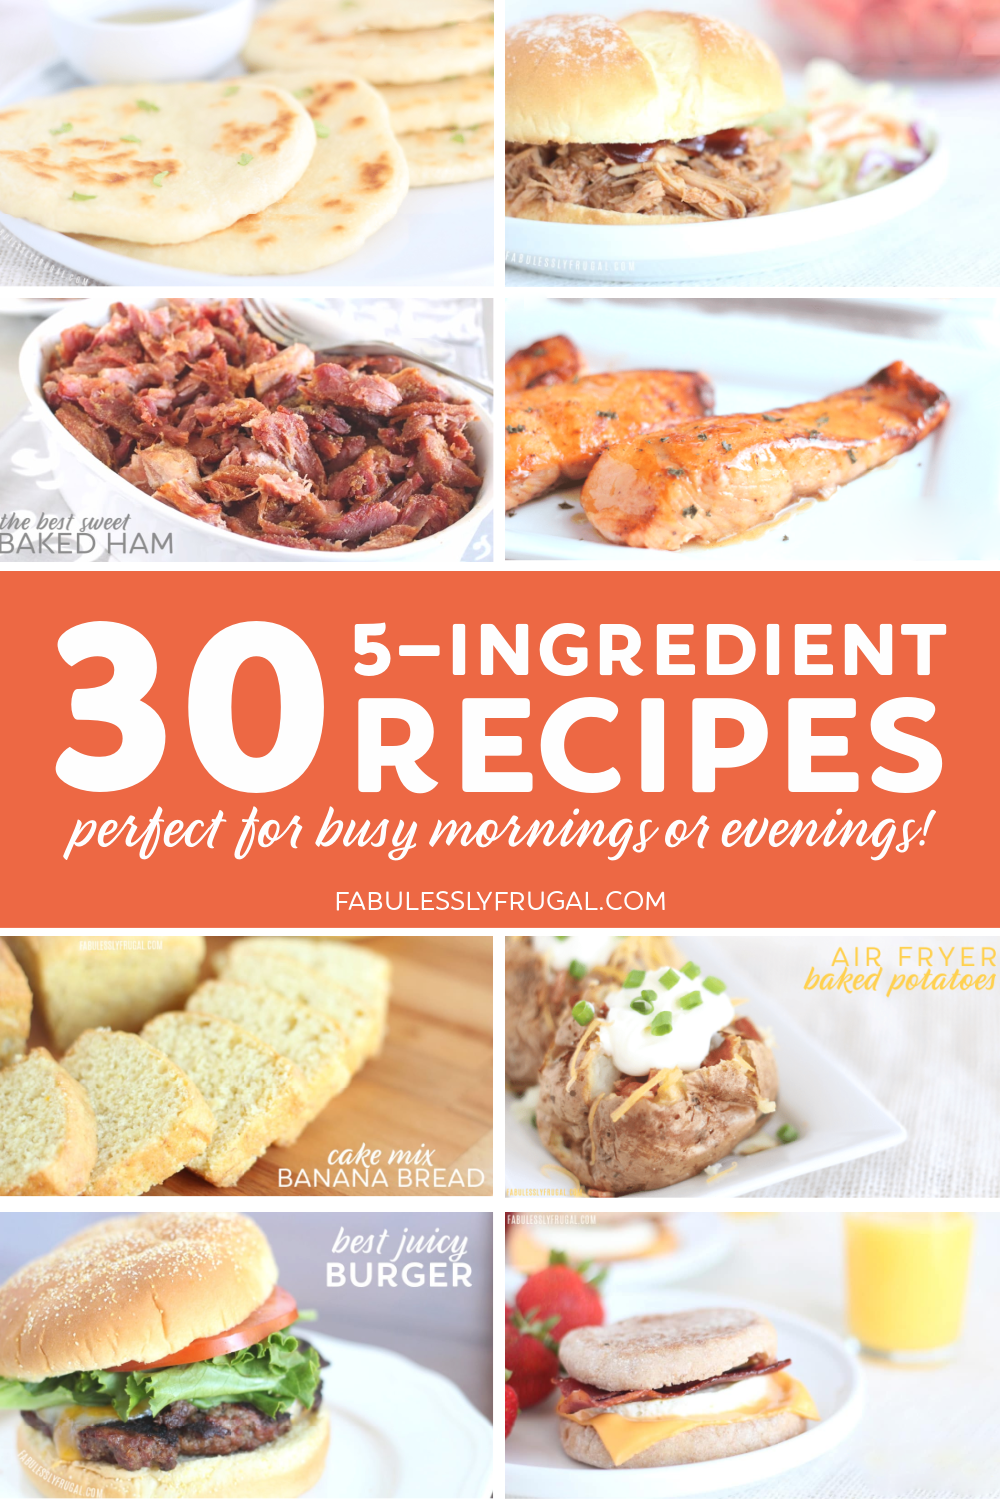 30 5-ingredient recipes perfect for busy days